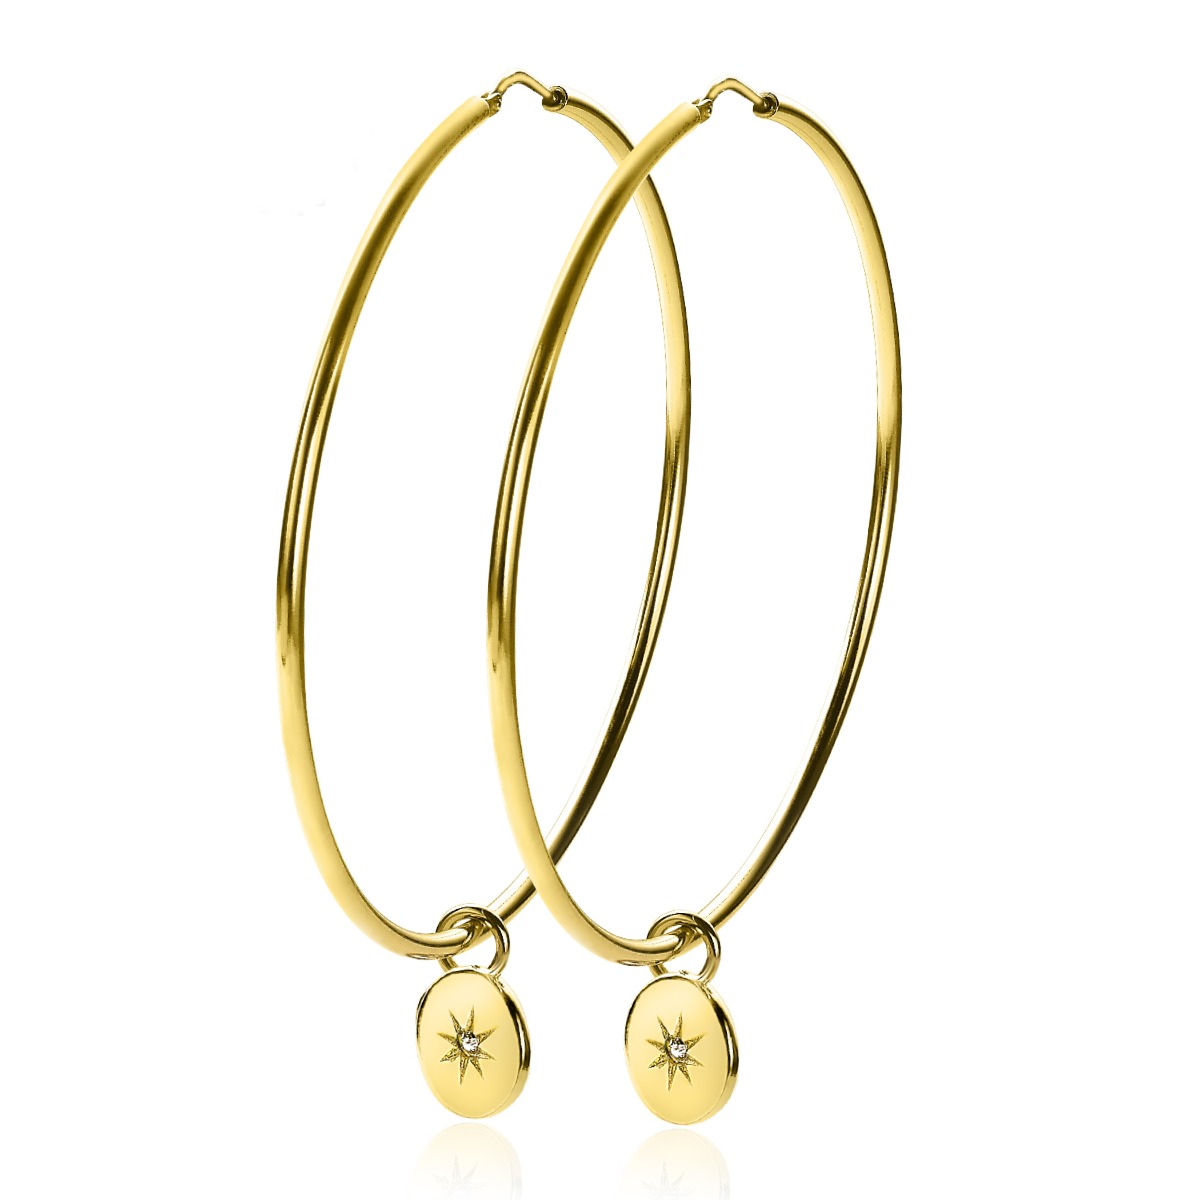 10mm ZINZI Gold Plated Sterling Silver Earrings Pendants Coin with a Sun and White Zirconias ZICH1994G (excl. hoop earrings)